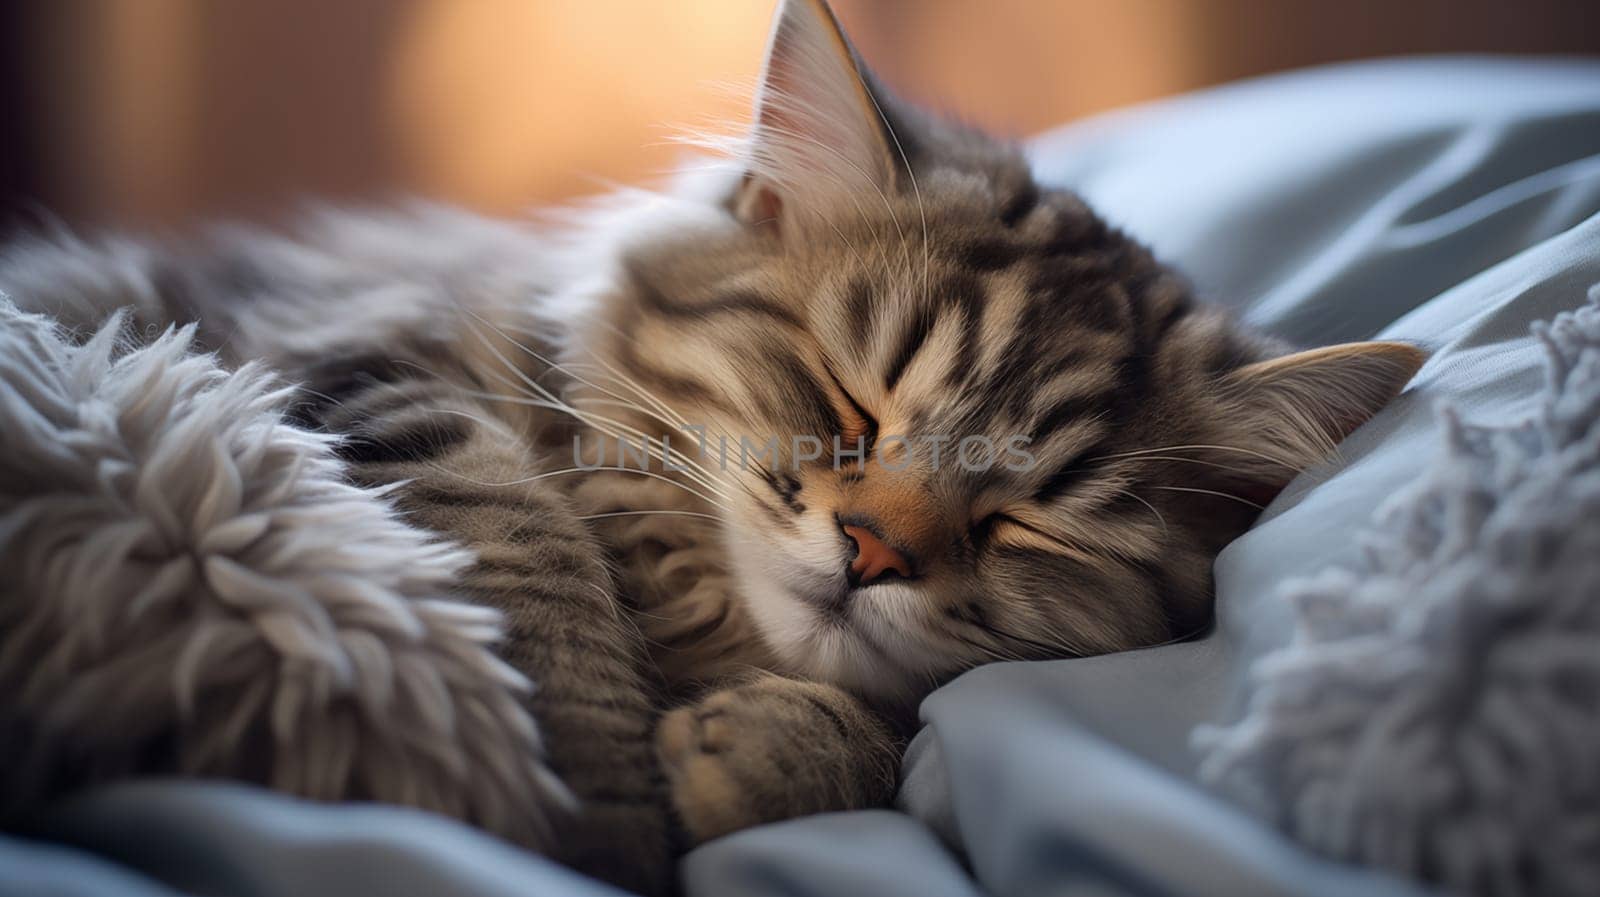 Cute tabby cat sleeping on bed at home, in daylight, close-up.